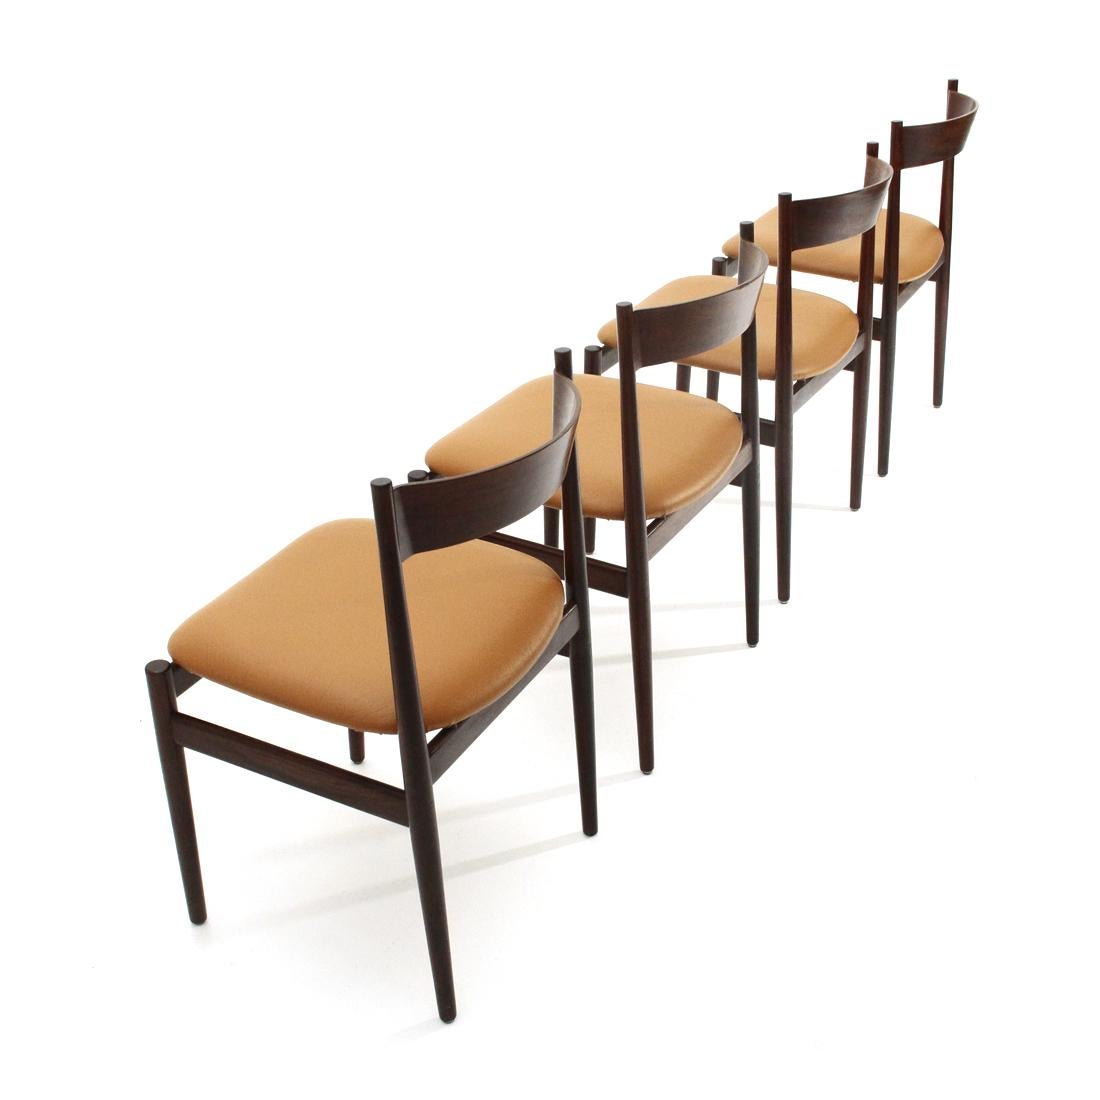 4 '107' Chairs by Gianfranco Frattini for Cassina, 1960s In Good Condition For Sale In Savona, IT